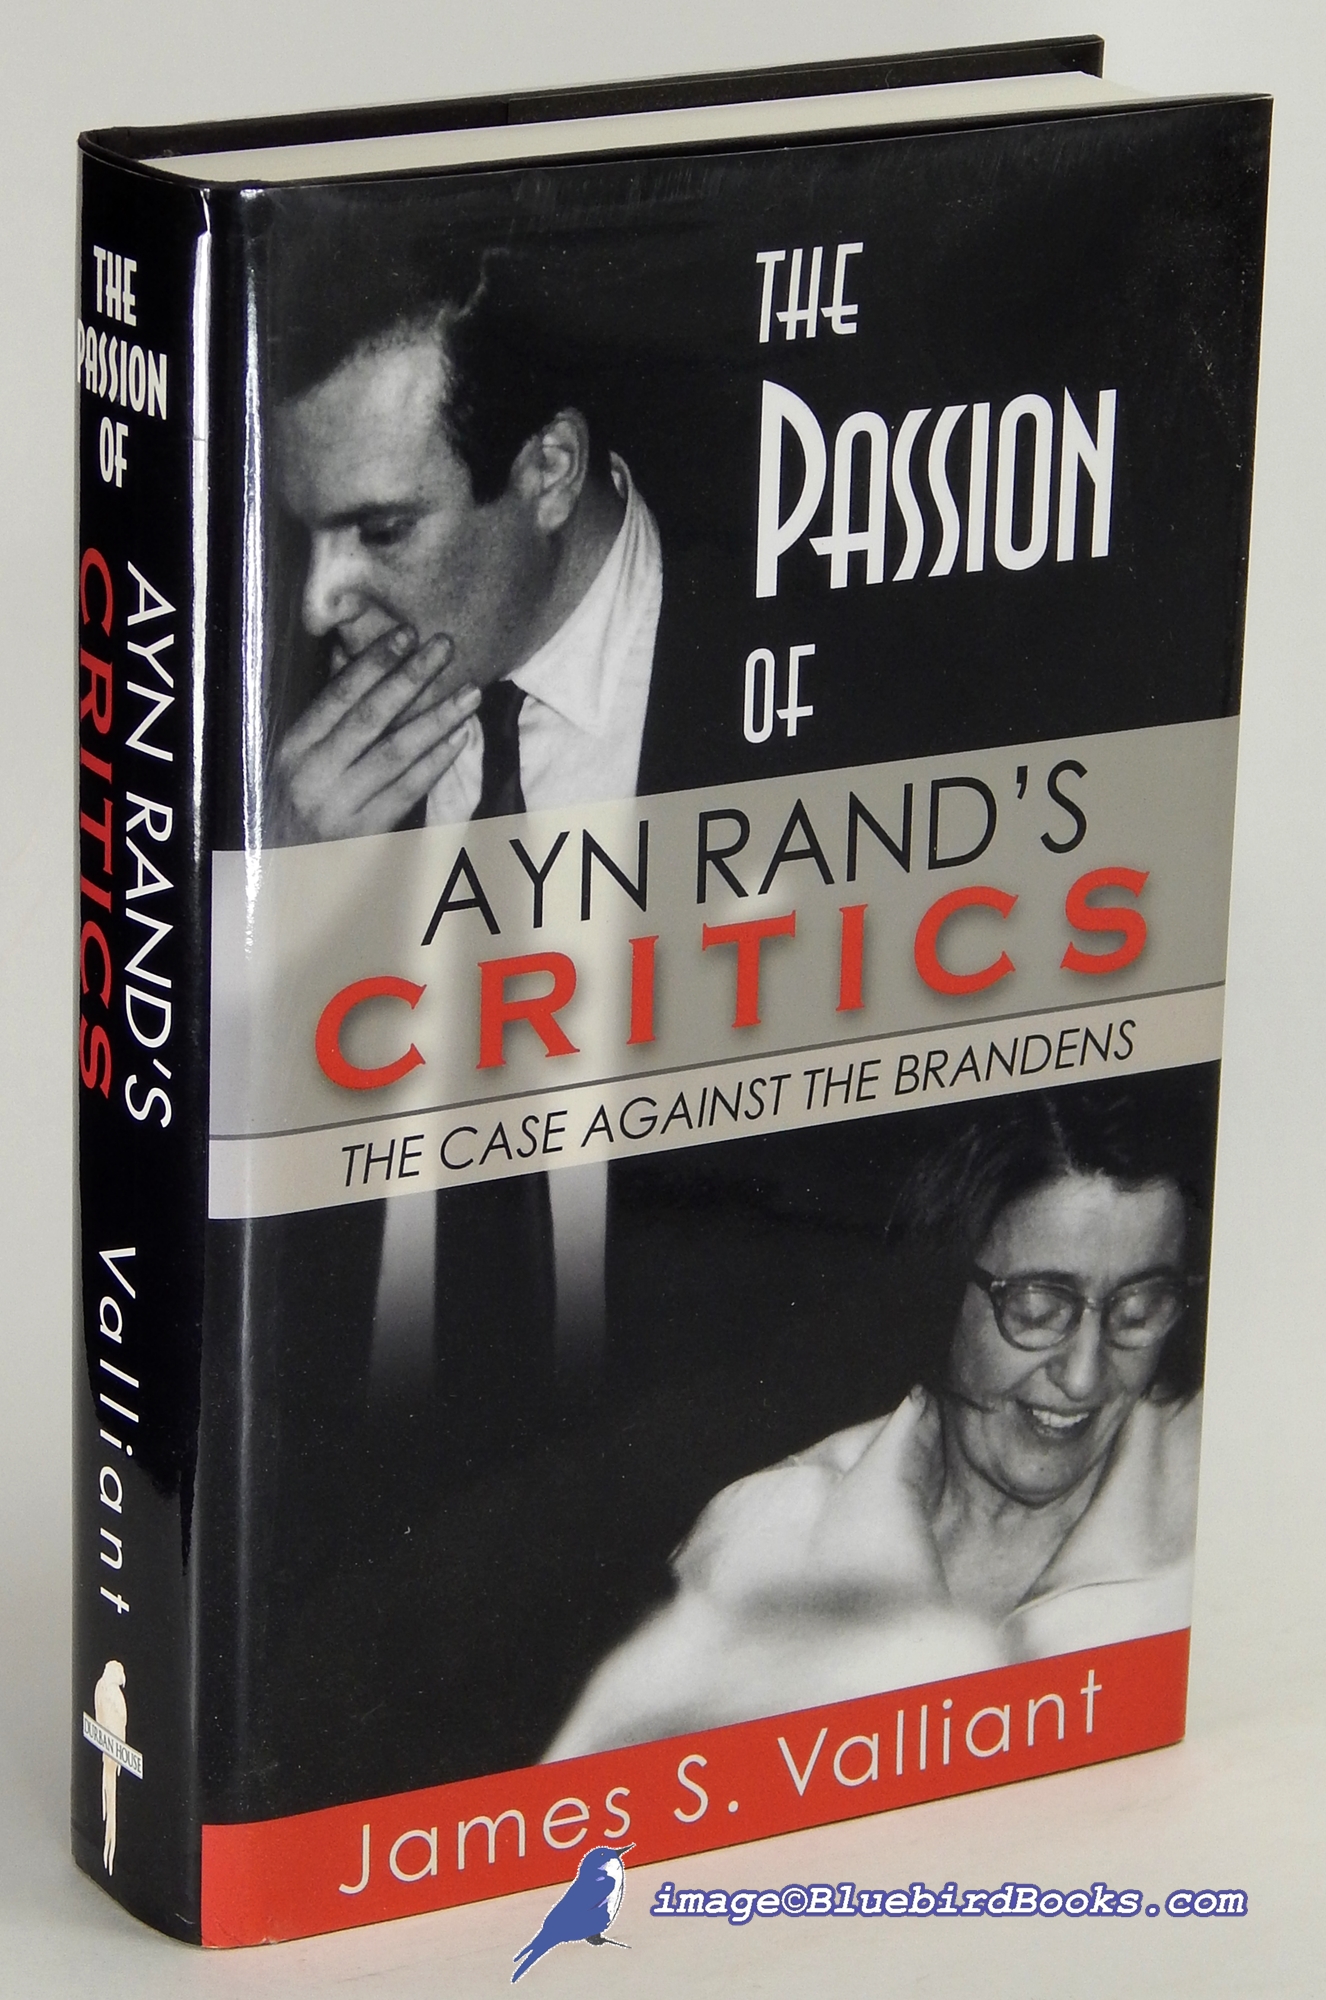 VALLIANT, JAMES S. - The Passion of Ayn Rand's Critics: The Case Against the Brandens